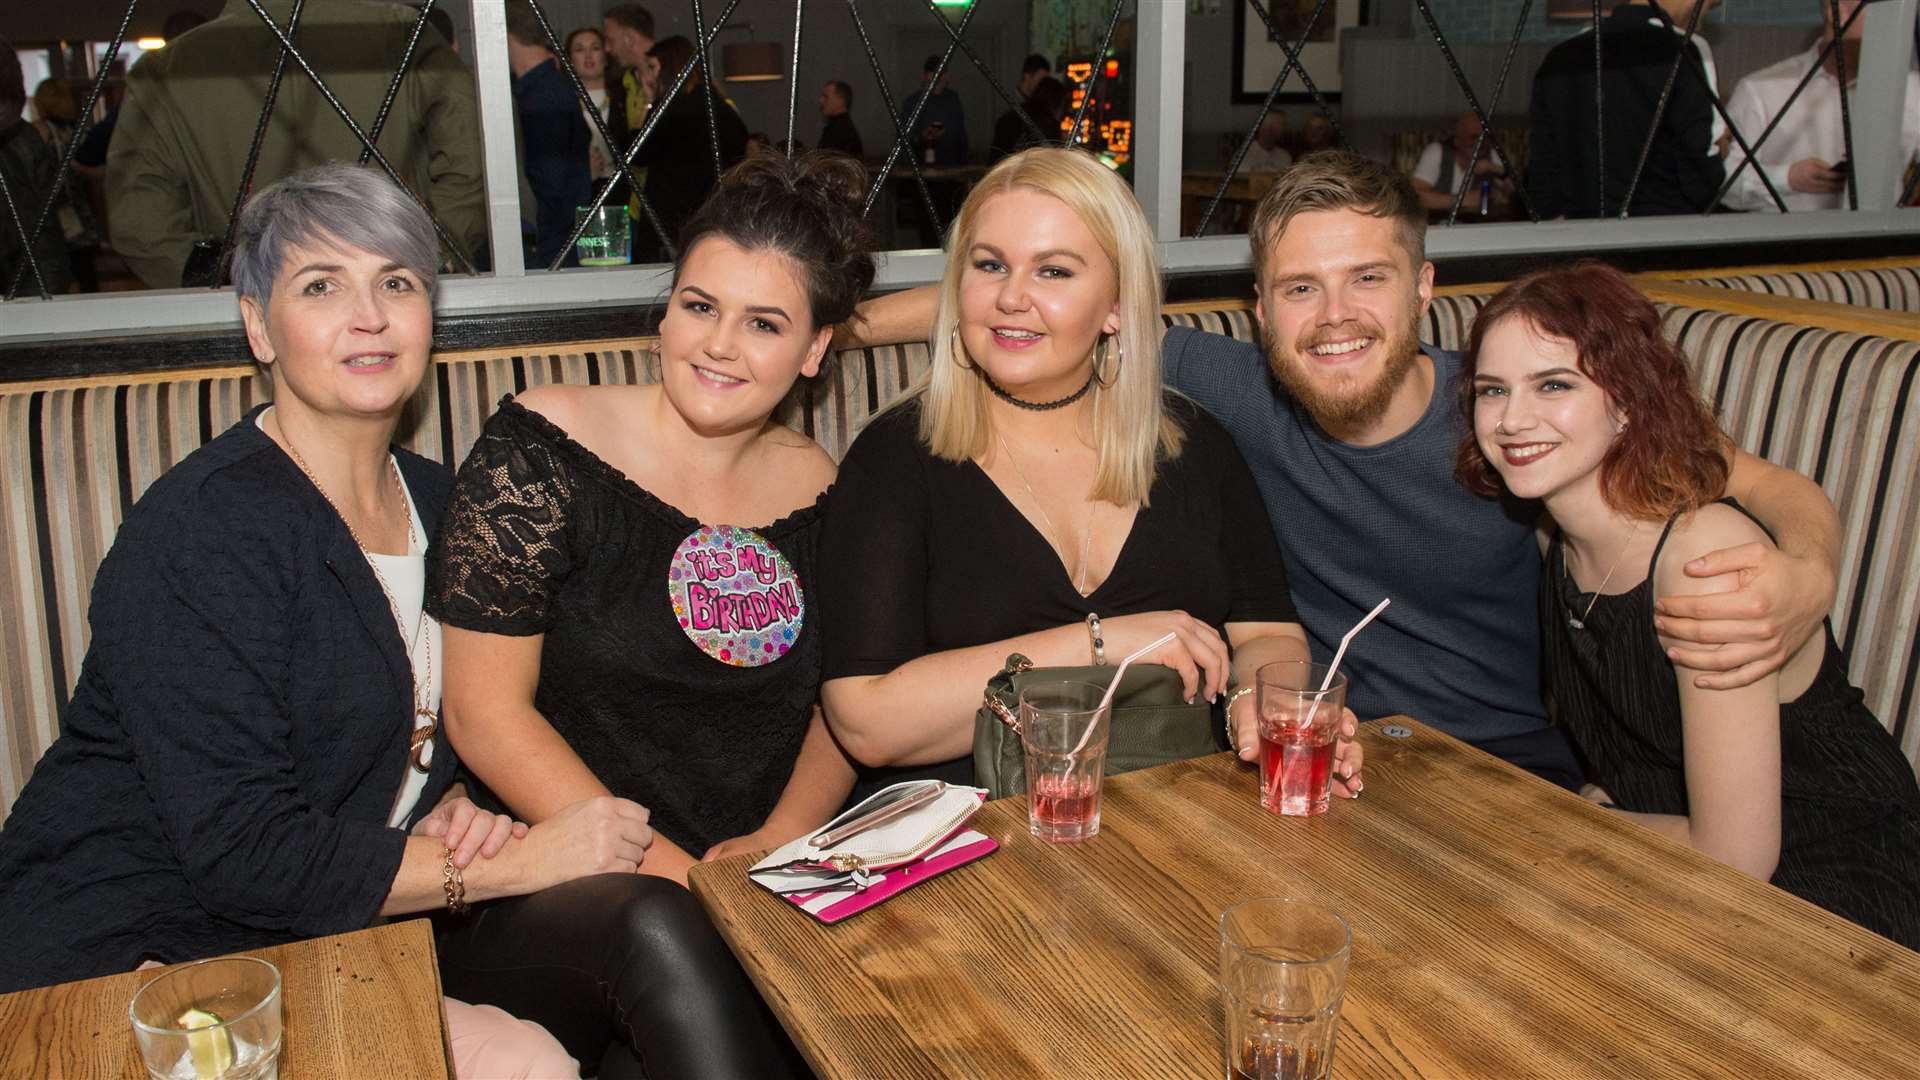 CitySeen 08JUL2017 ..Birthday celebrations for Annabel Brown (badge) with (left to right) Linda Brown, Siobhan Williams, Ben Brown and Lia Brown...Picture: Callum Mackay. Image No. 038171.